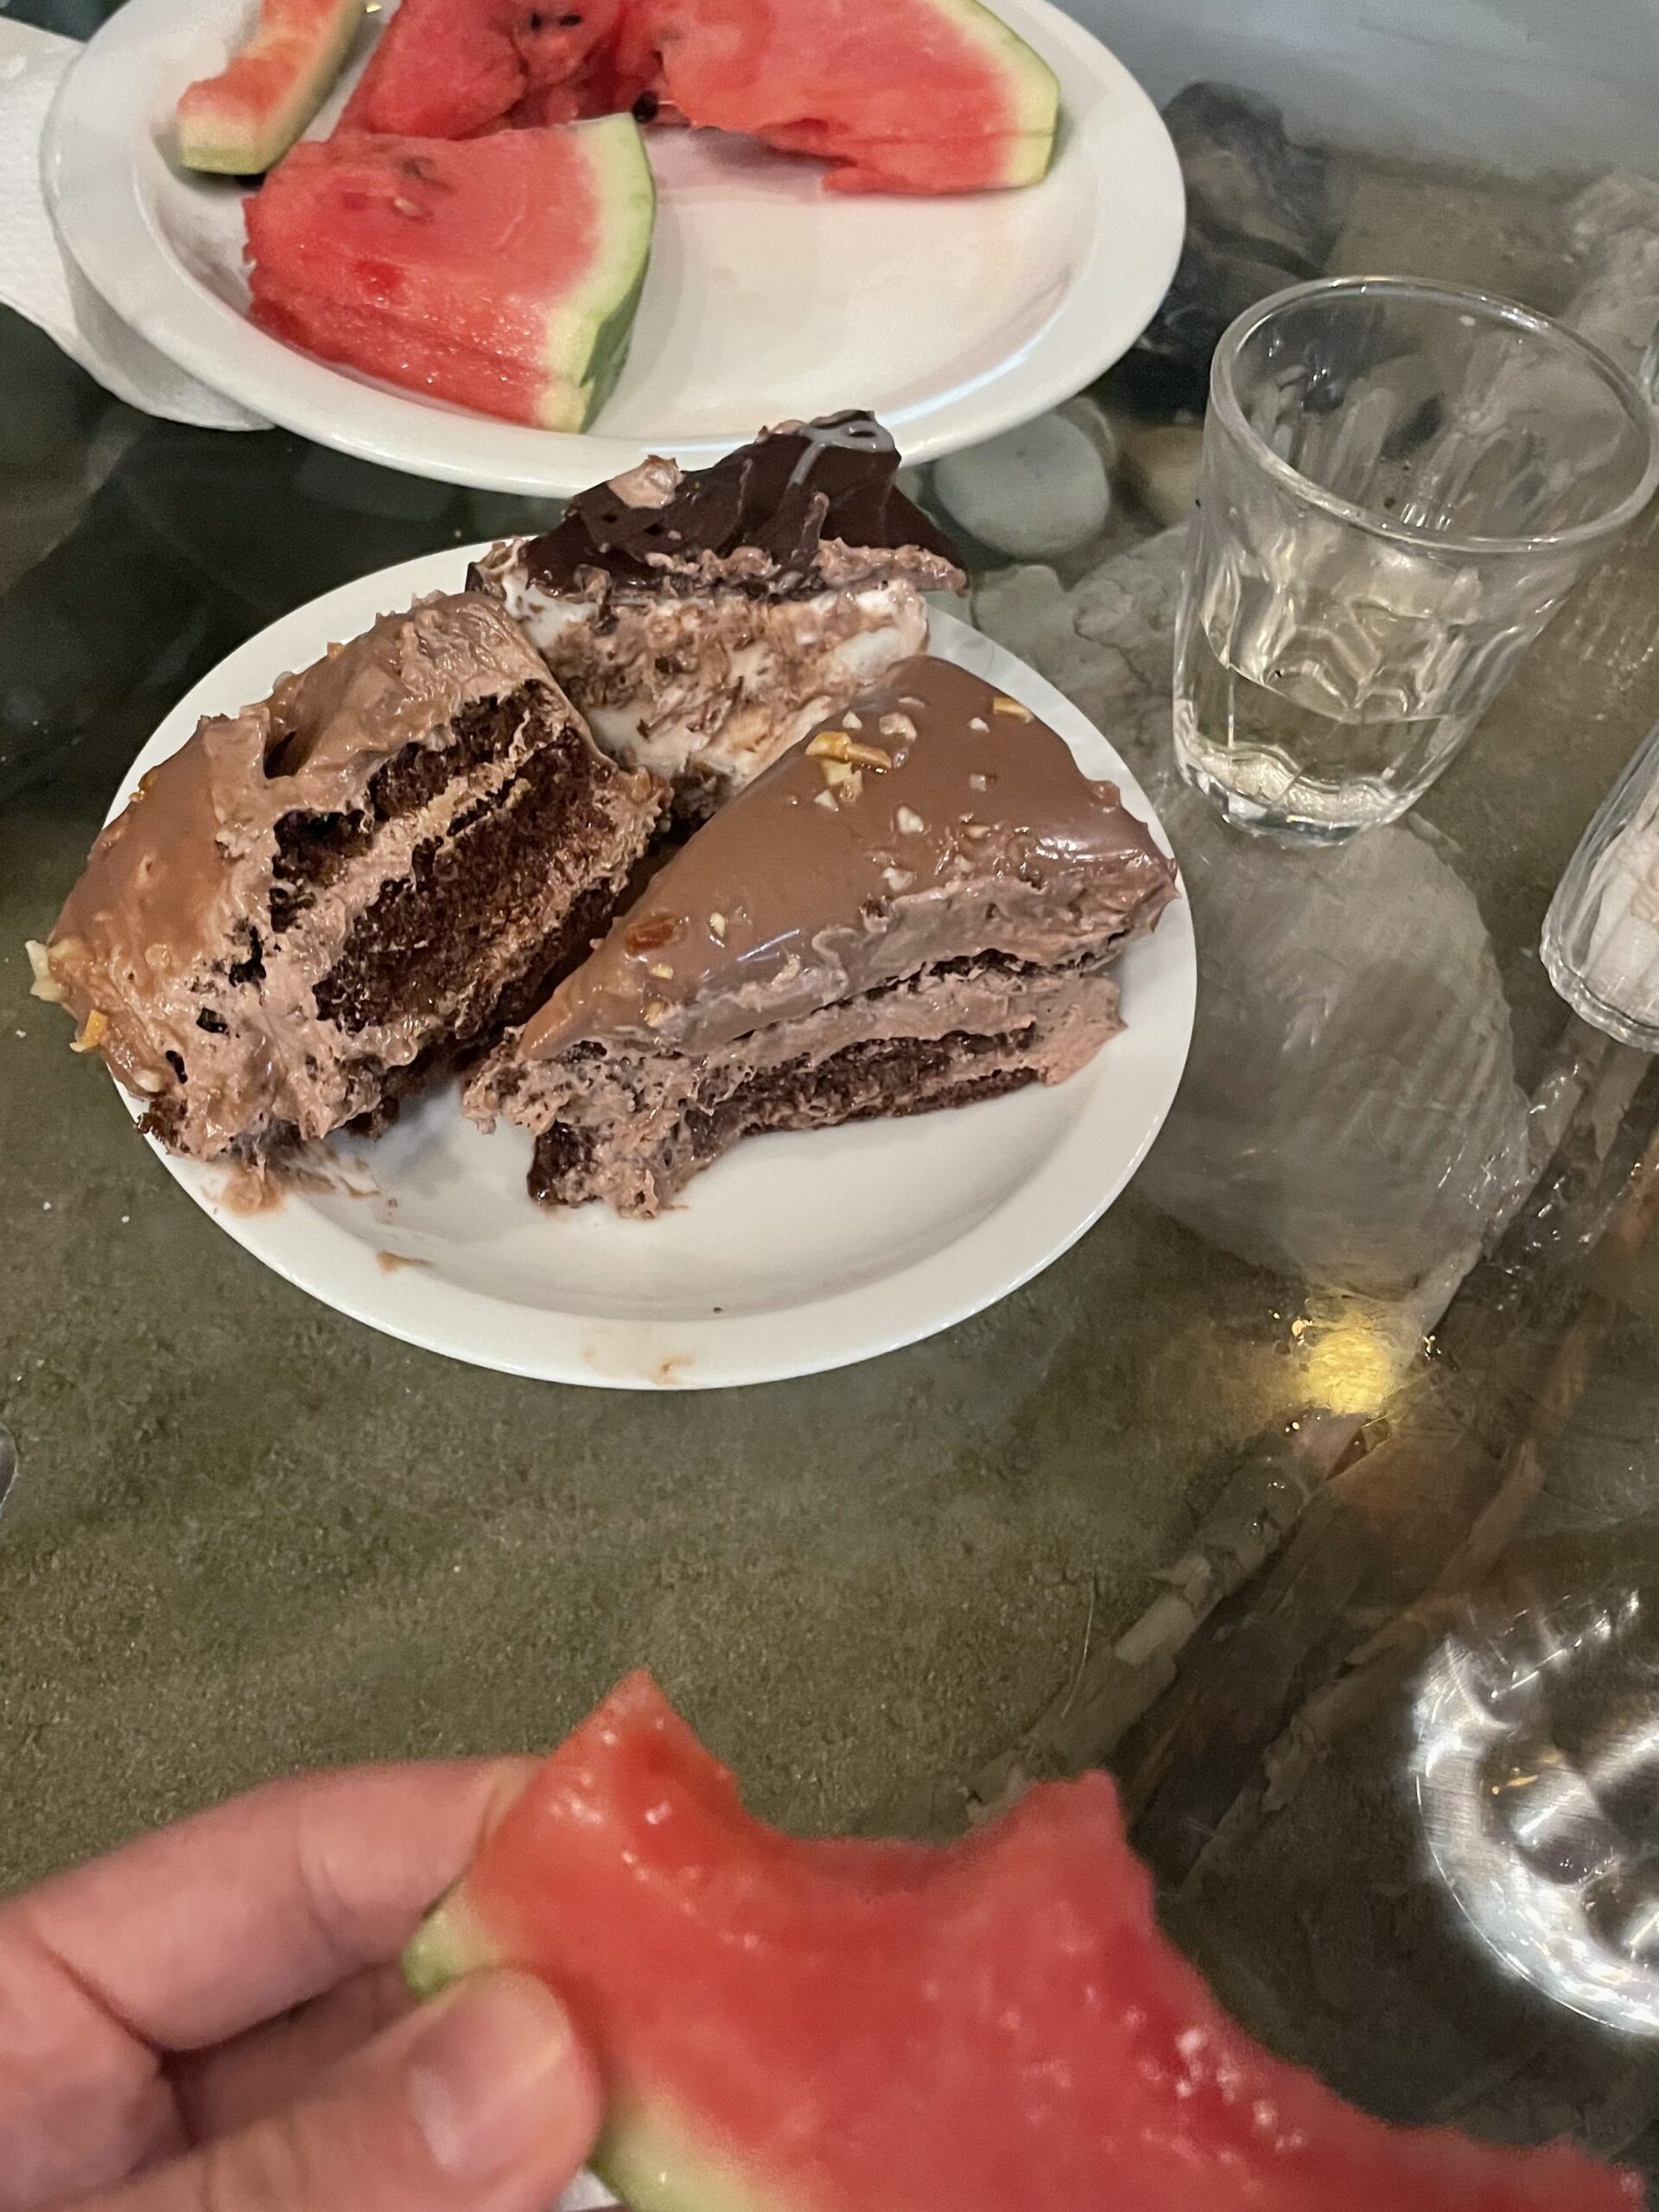 three slices of chocolate cake and watermelon on a plate